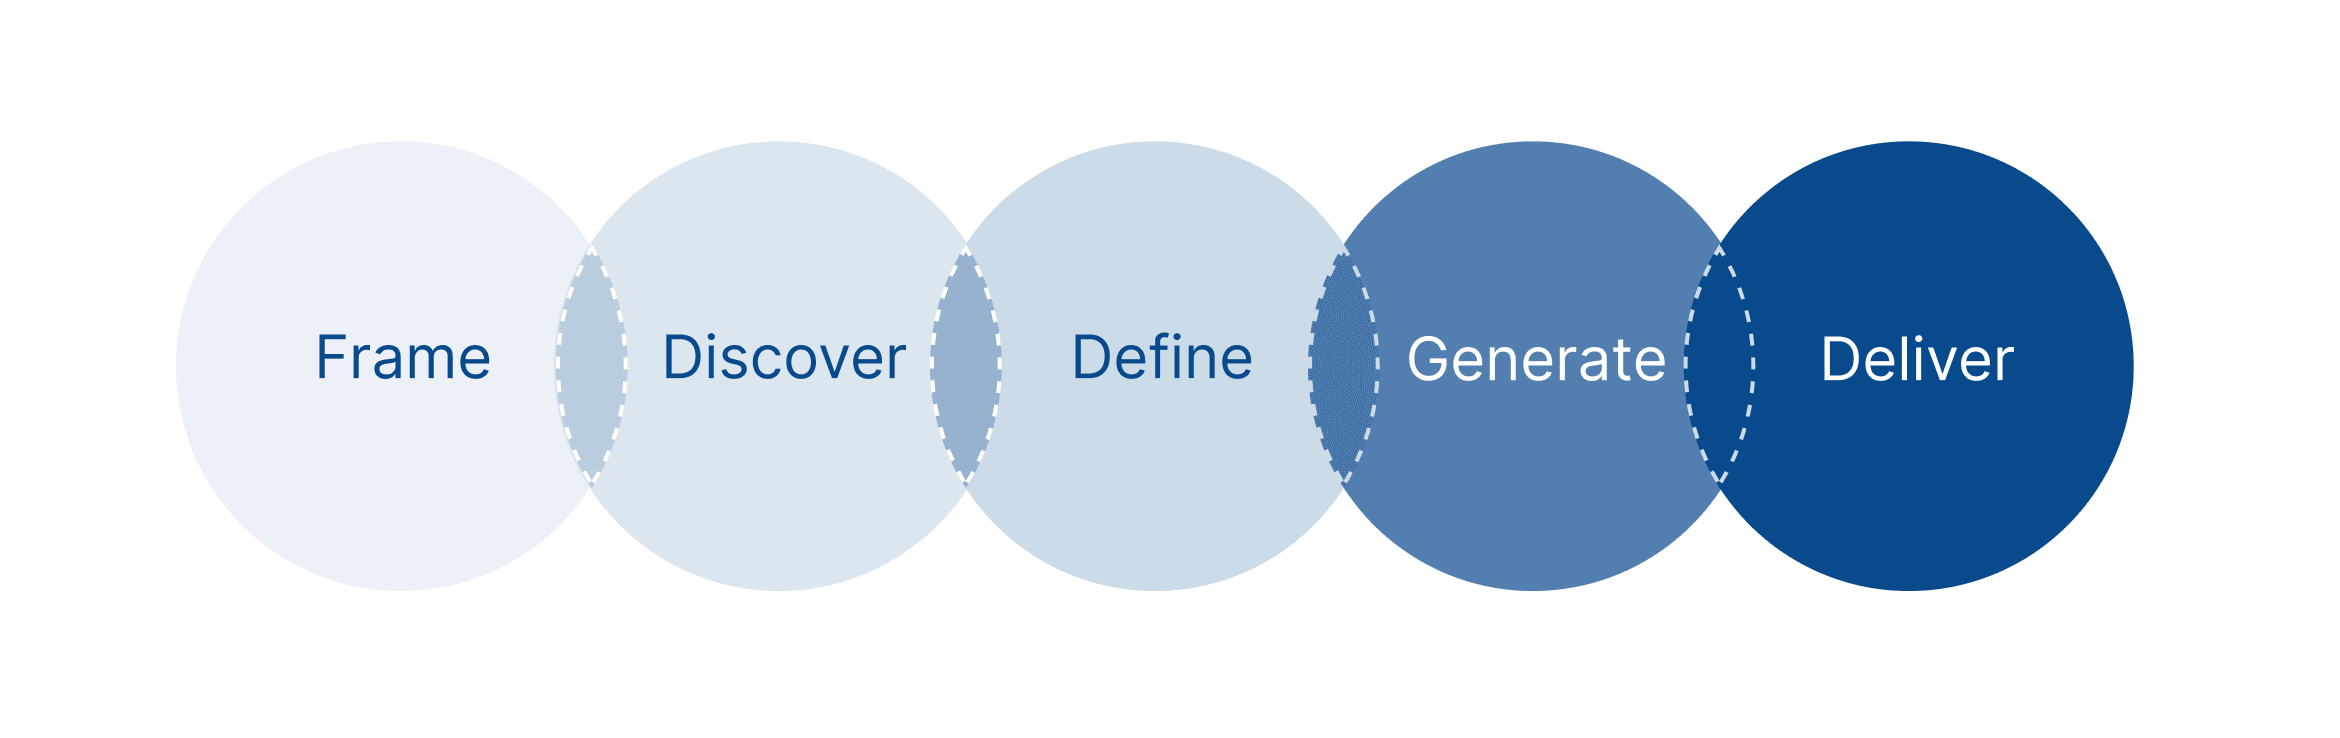 User centred approach diagram